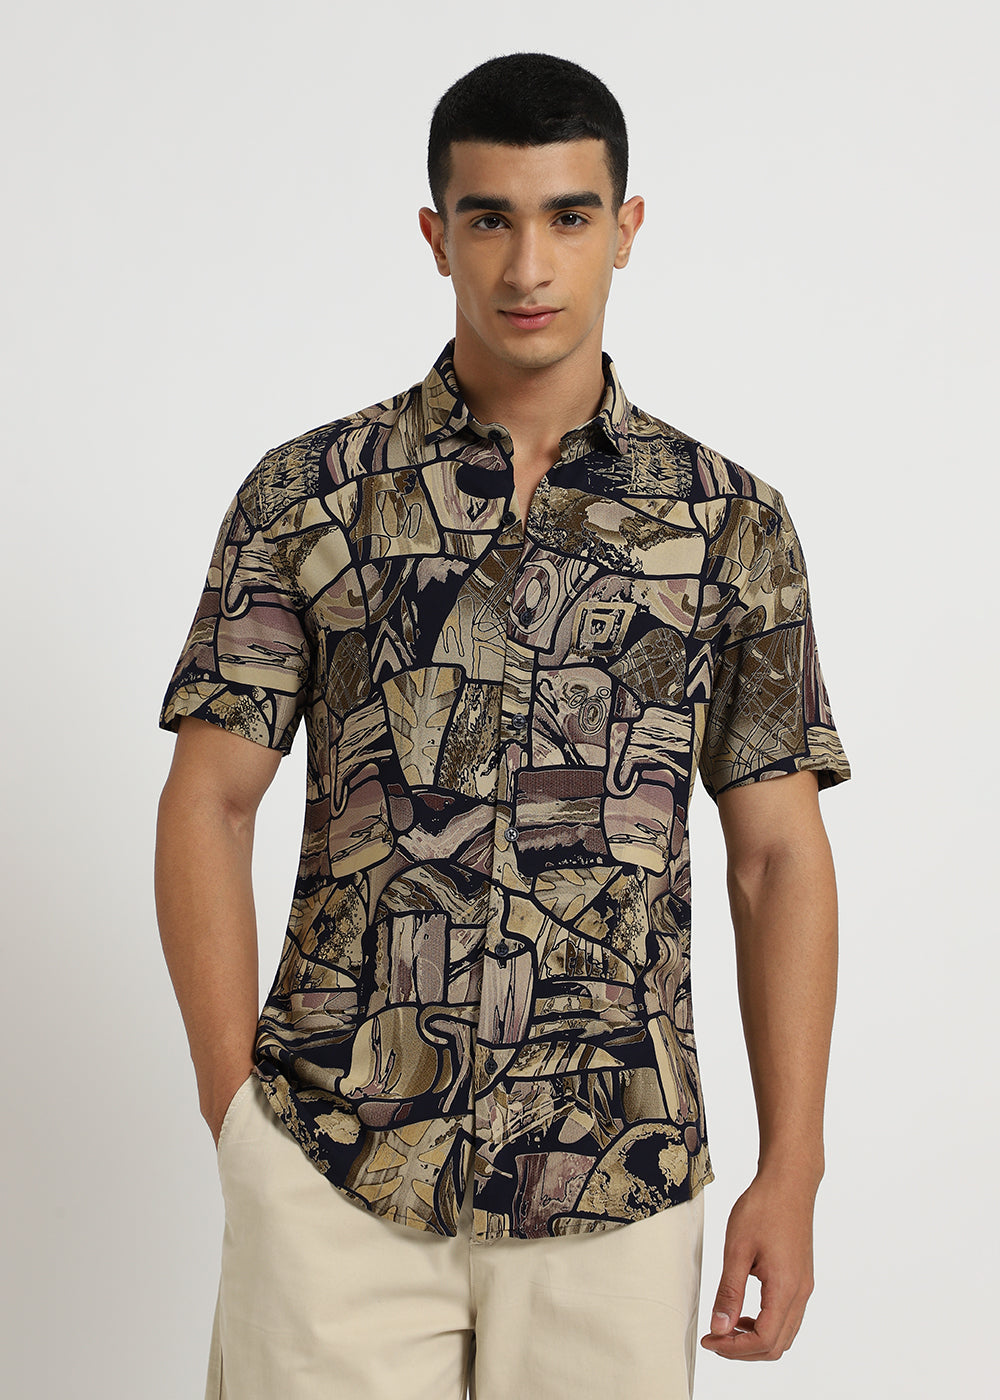 Abstract Mosaic Feather shirt